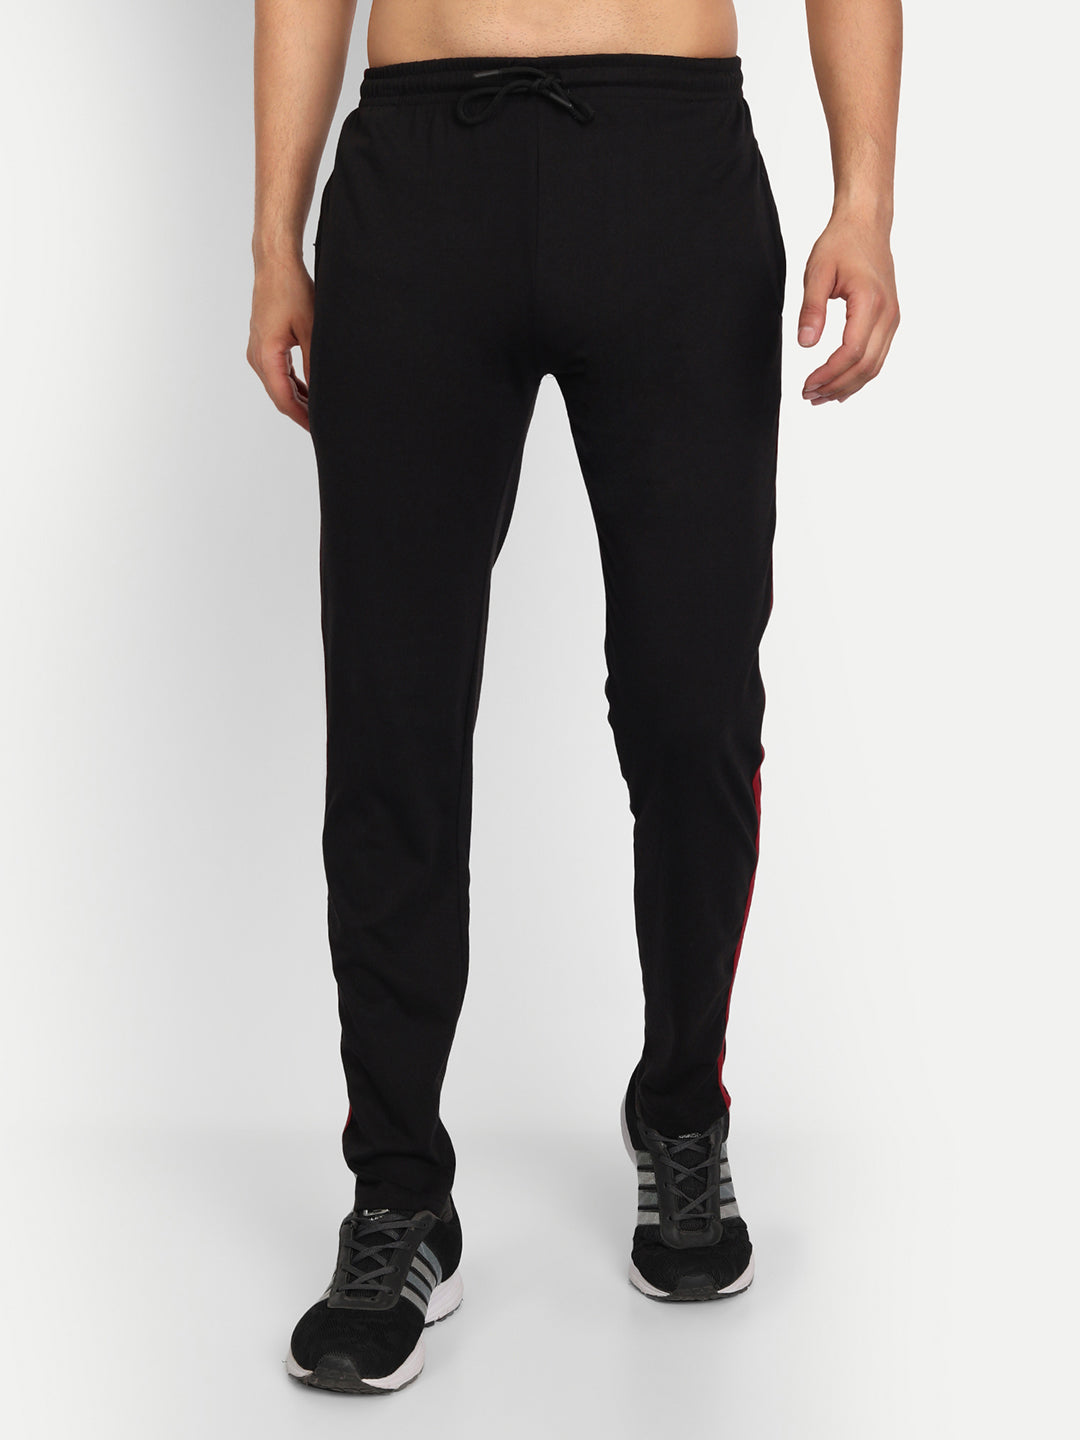 Buy Puma Men Black Track Pants Online at Low Prices in India  Paytmmallcom